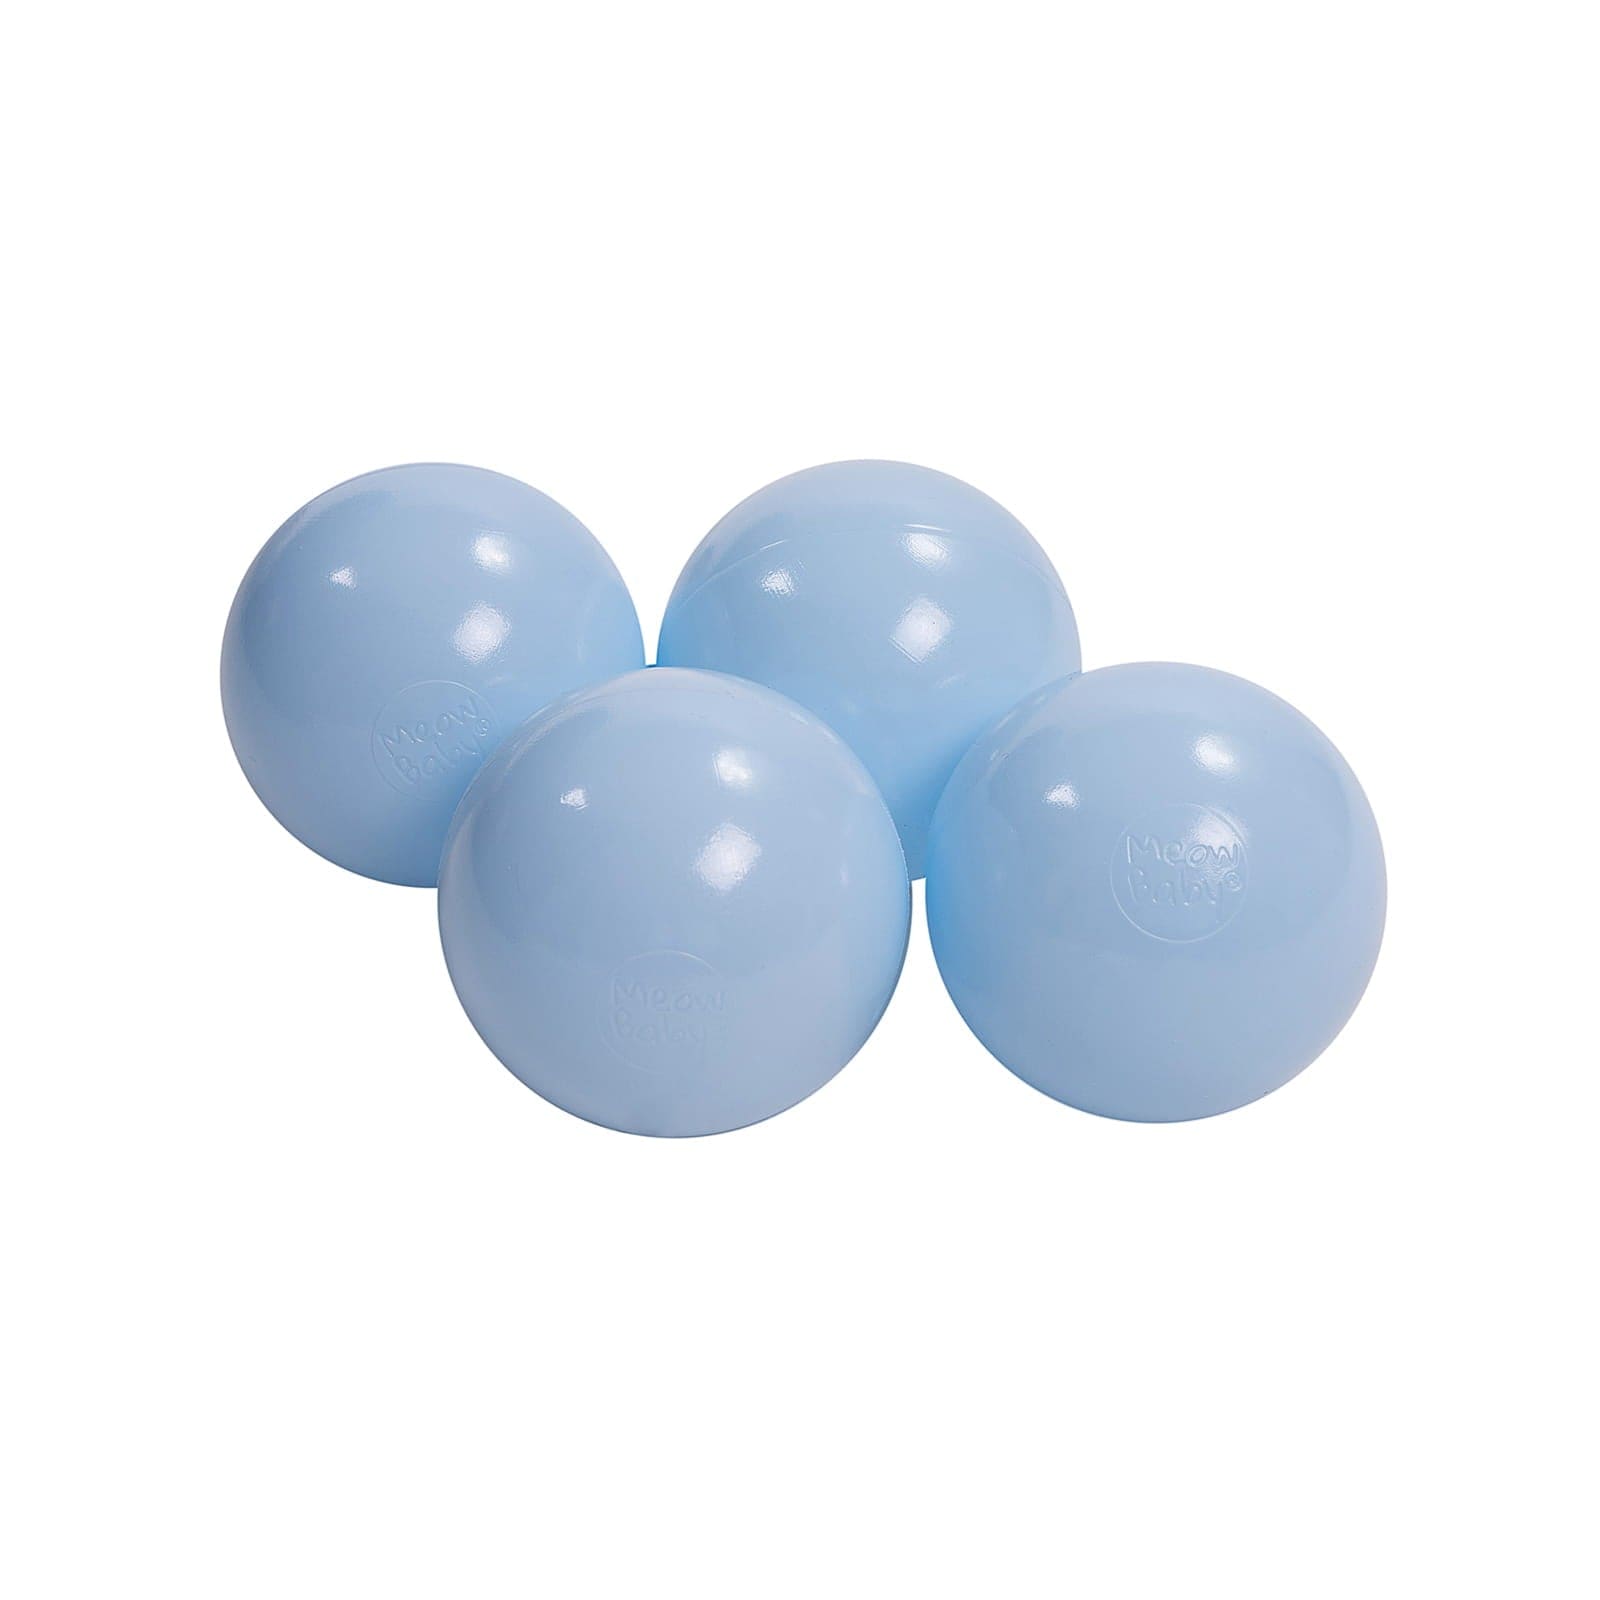 Soft CE Certified Plastic Balls For Kids By MeowBaby